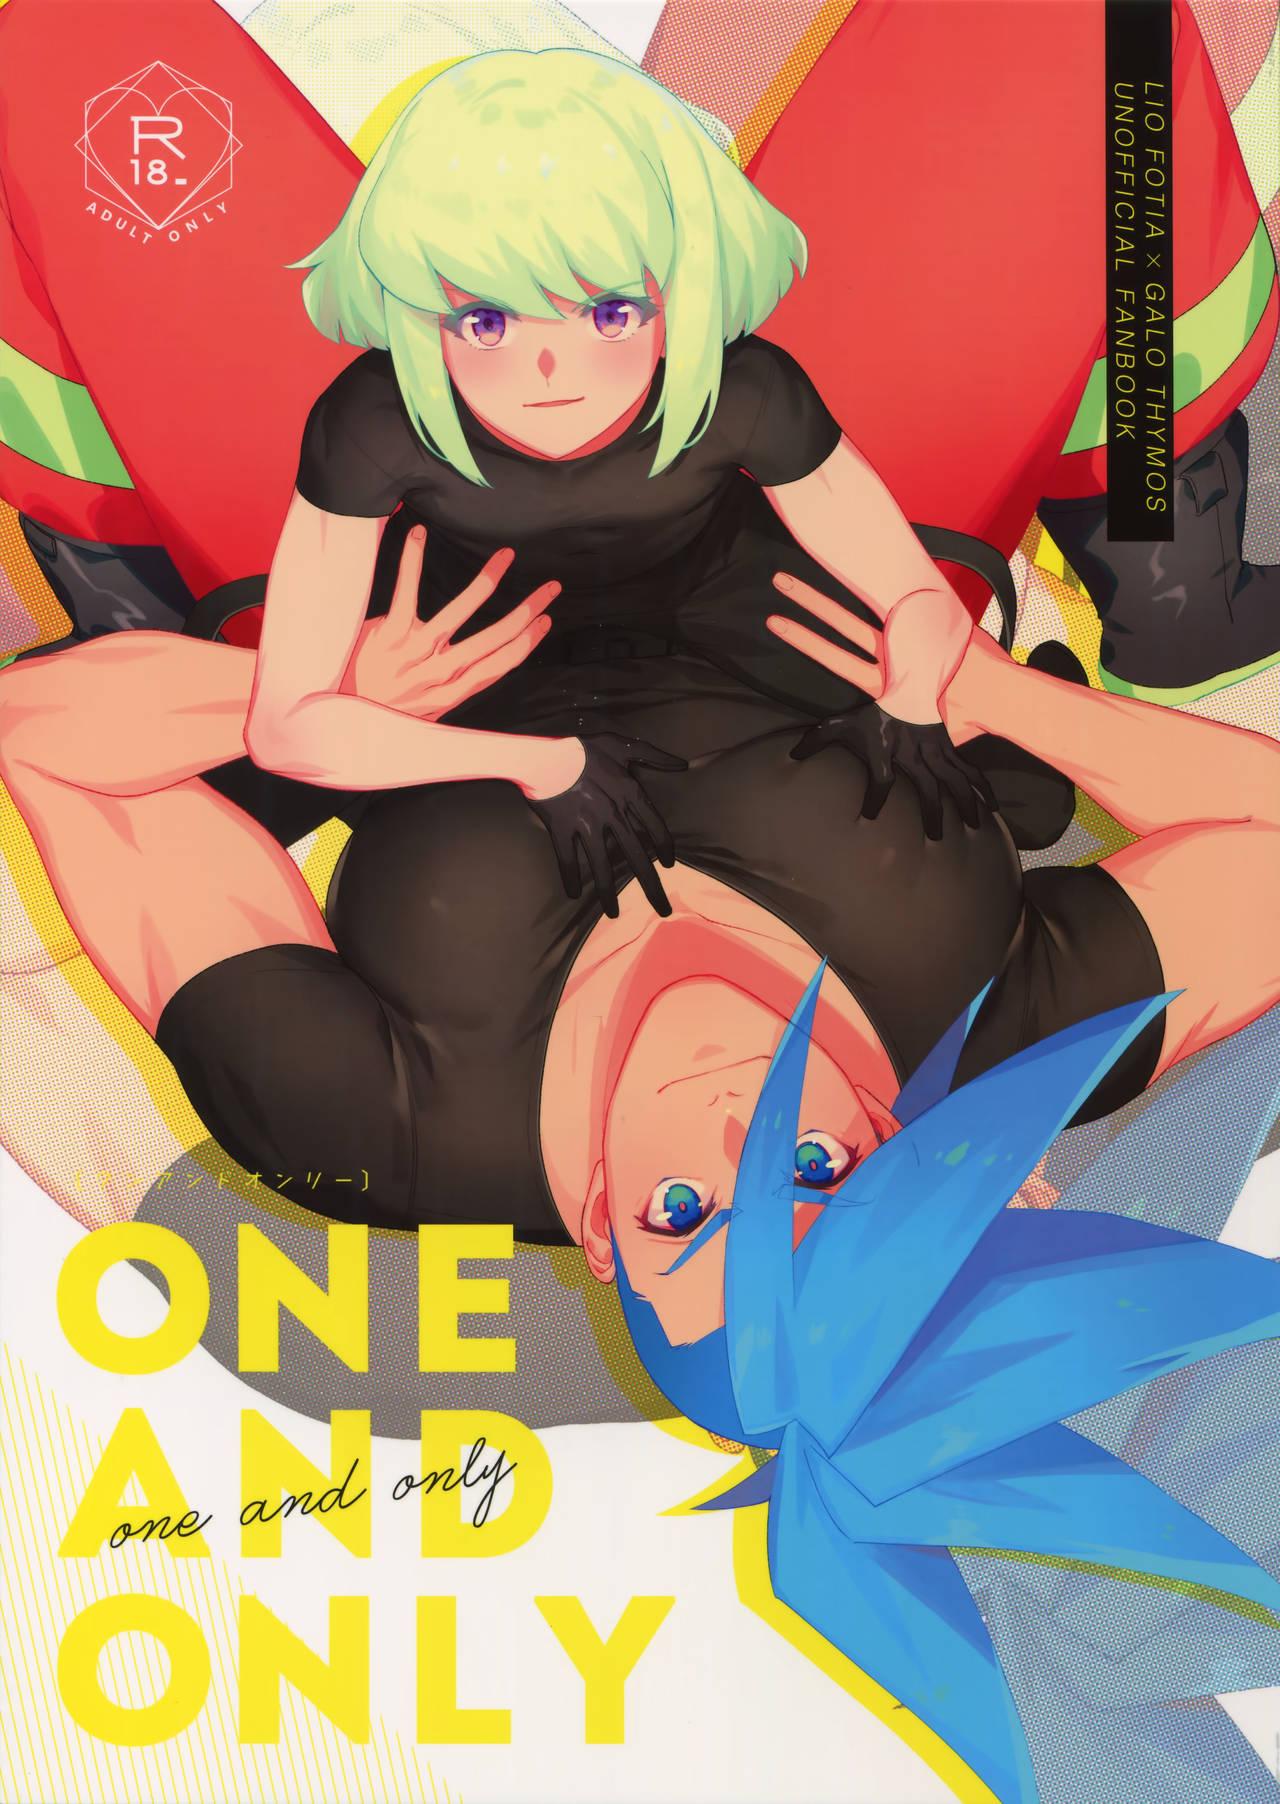 Maid One and Only - Promare Weird - Page 1